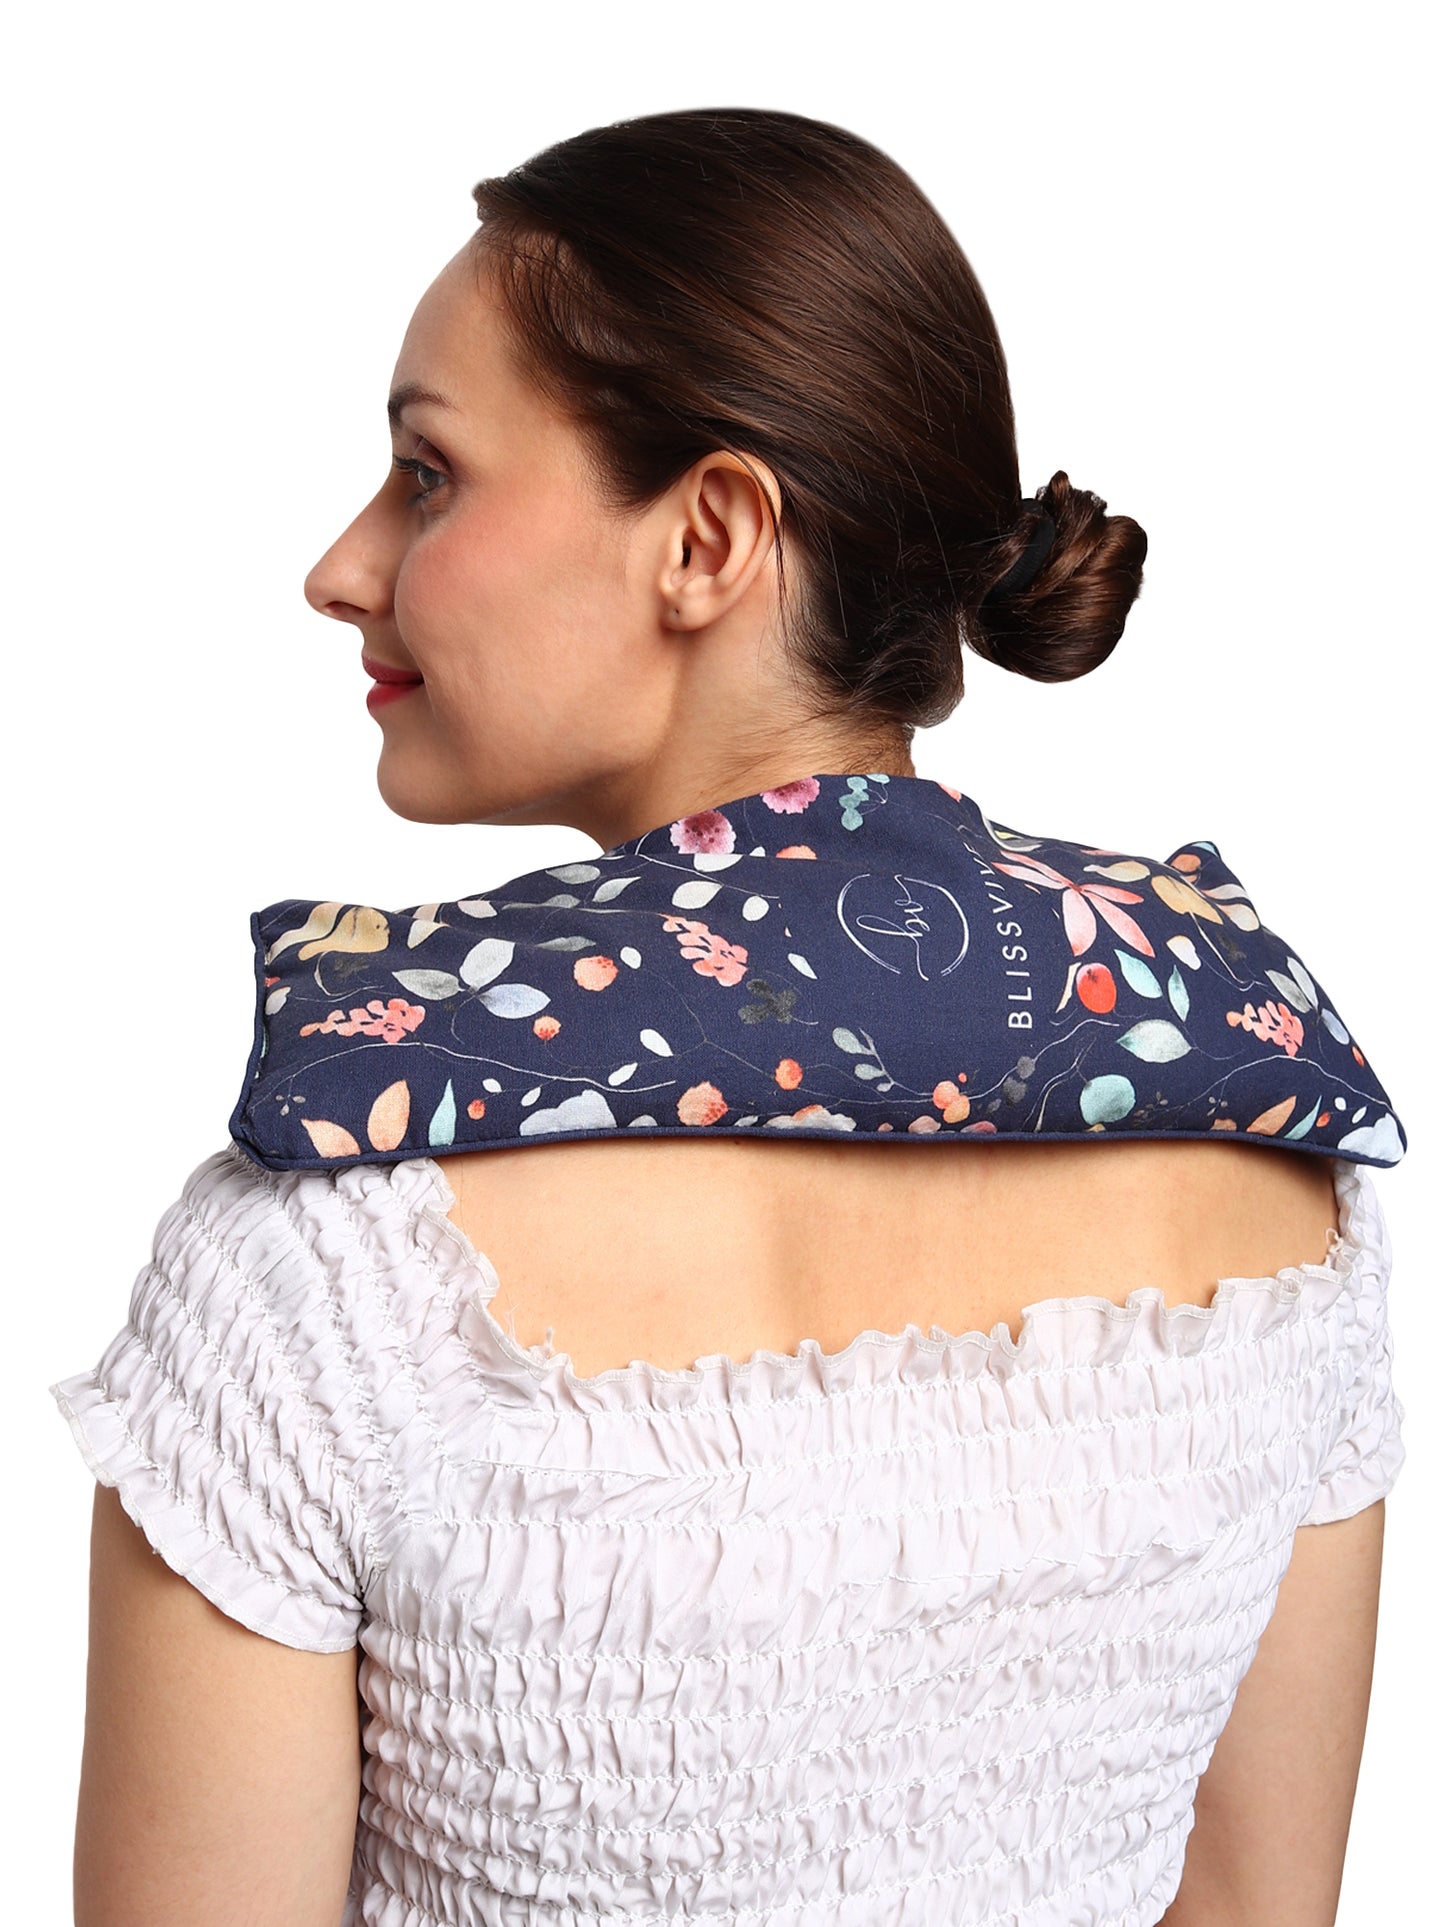 Aromatic Heating Pillow for neck, back and other muscle pain relief (Microwavable)